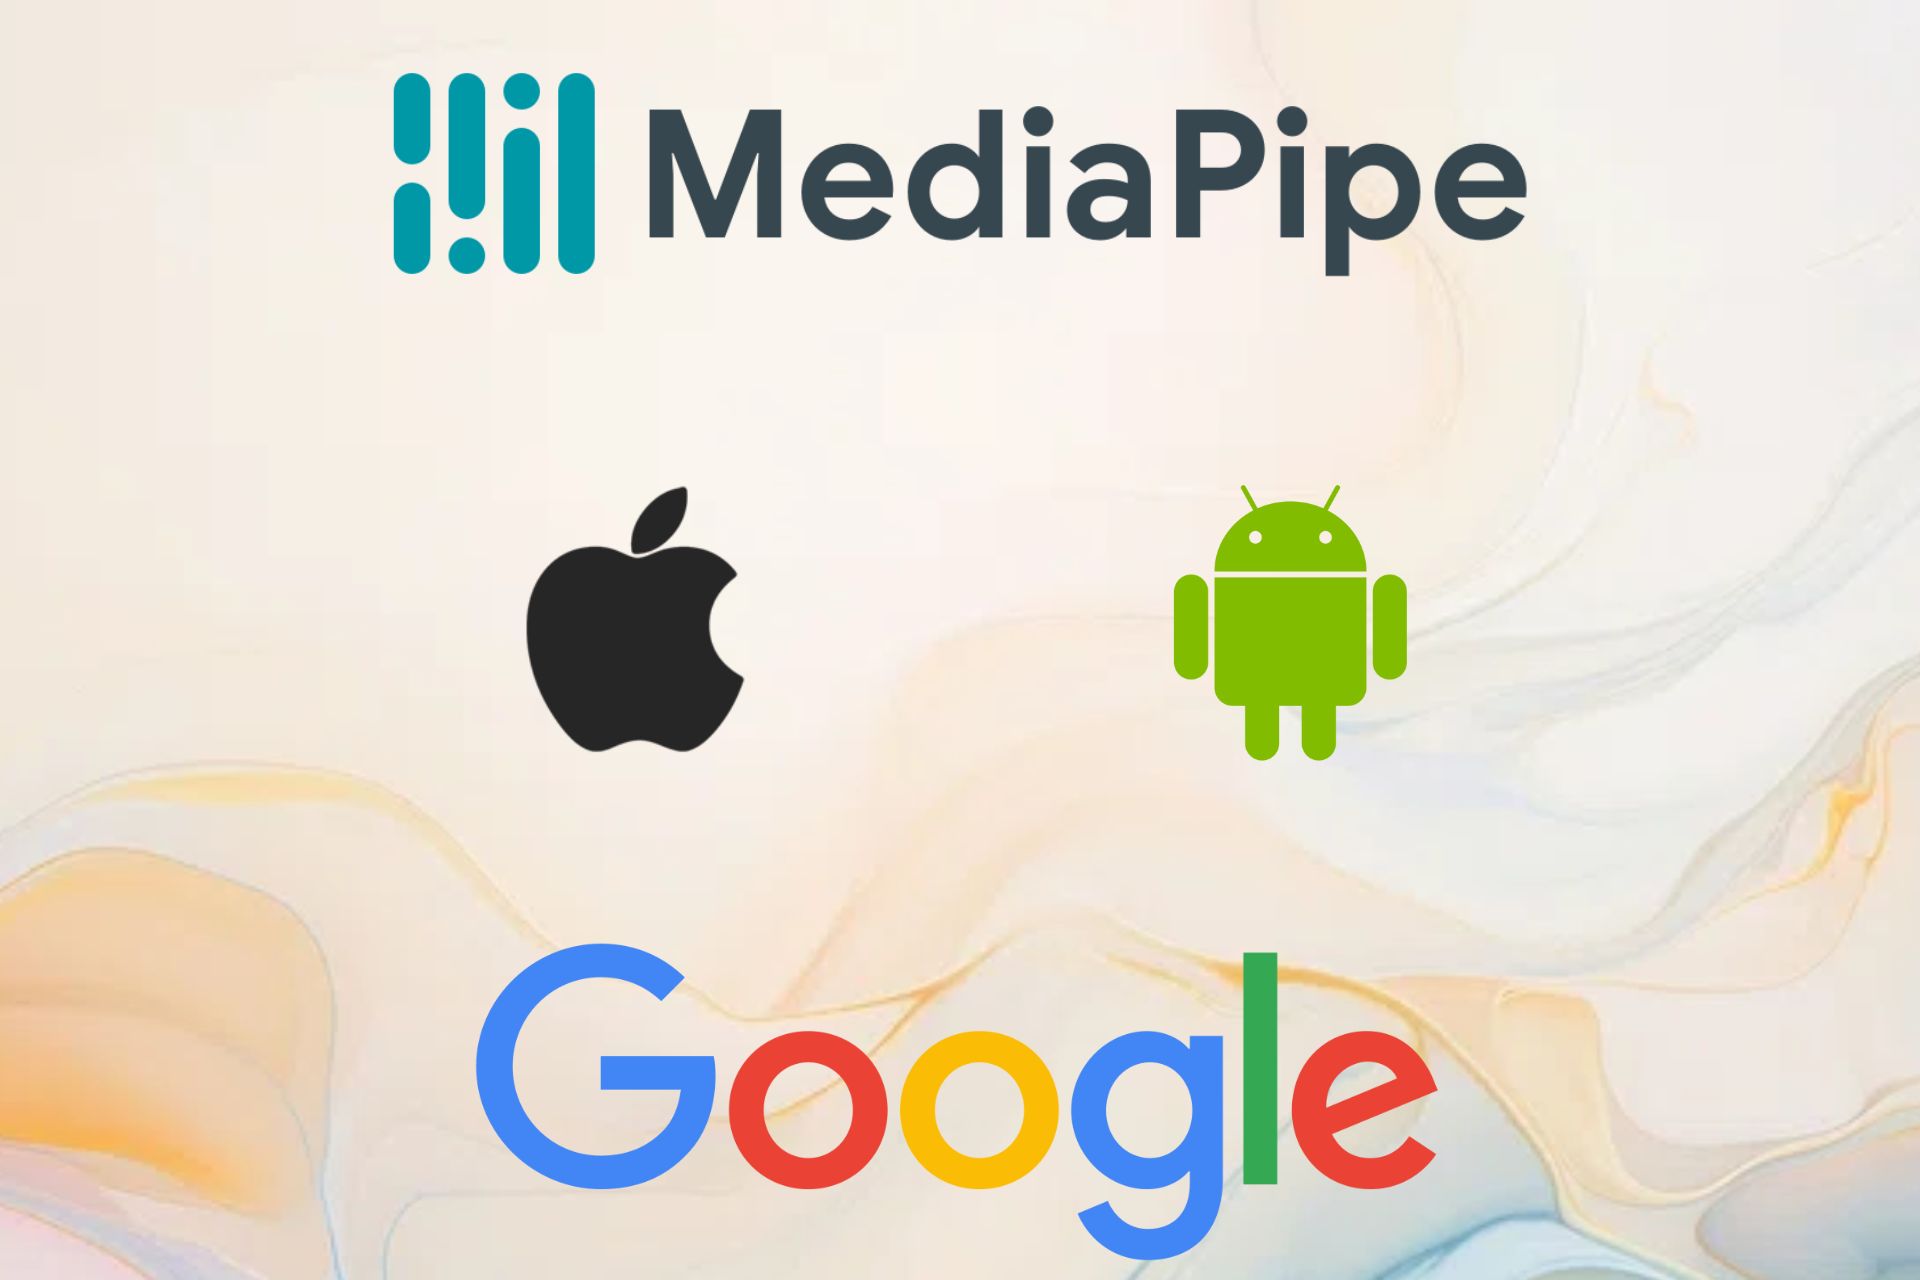 Experimental MediaPipe LLM Inference API featured next to the logos of Google, Android, and iOS